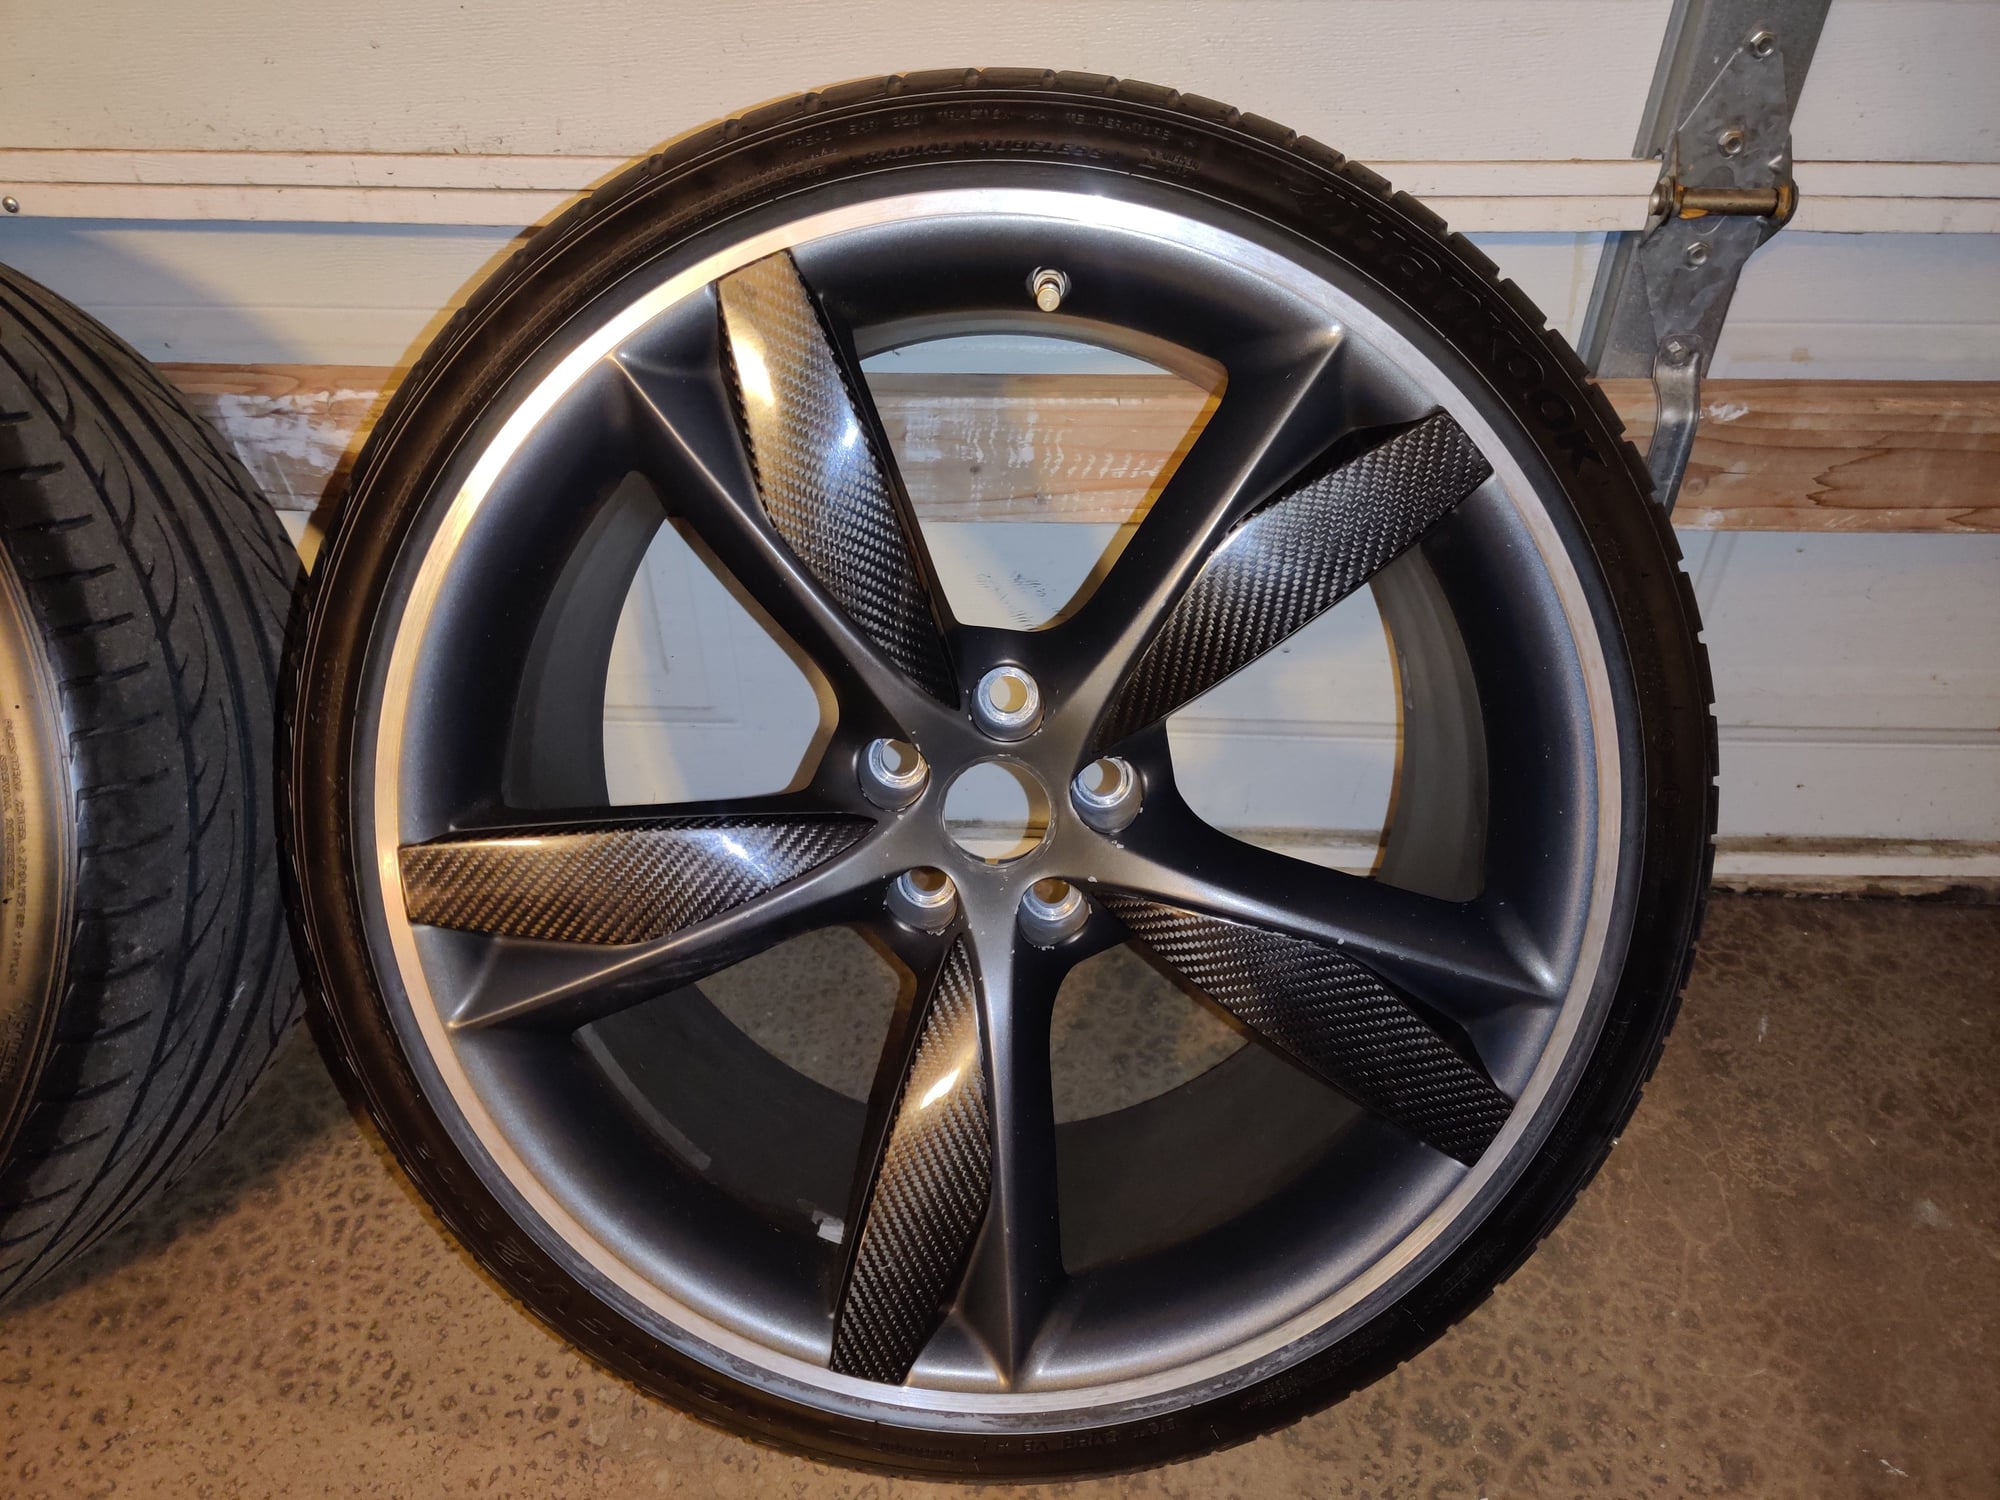 Wheels and Tires/Axles - 2 Jaguar carbon blade wheels 10.5" rears - Used - Highland, CA 92346, United States